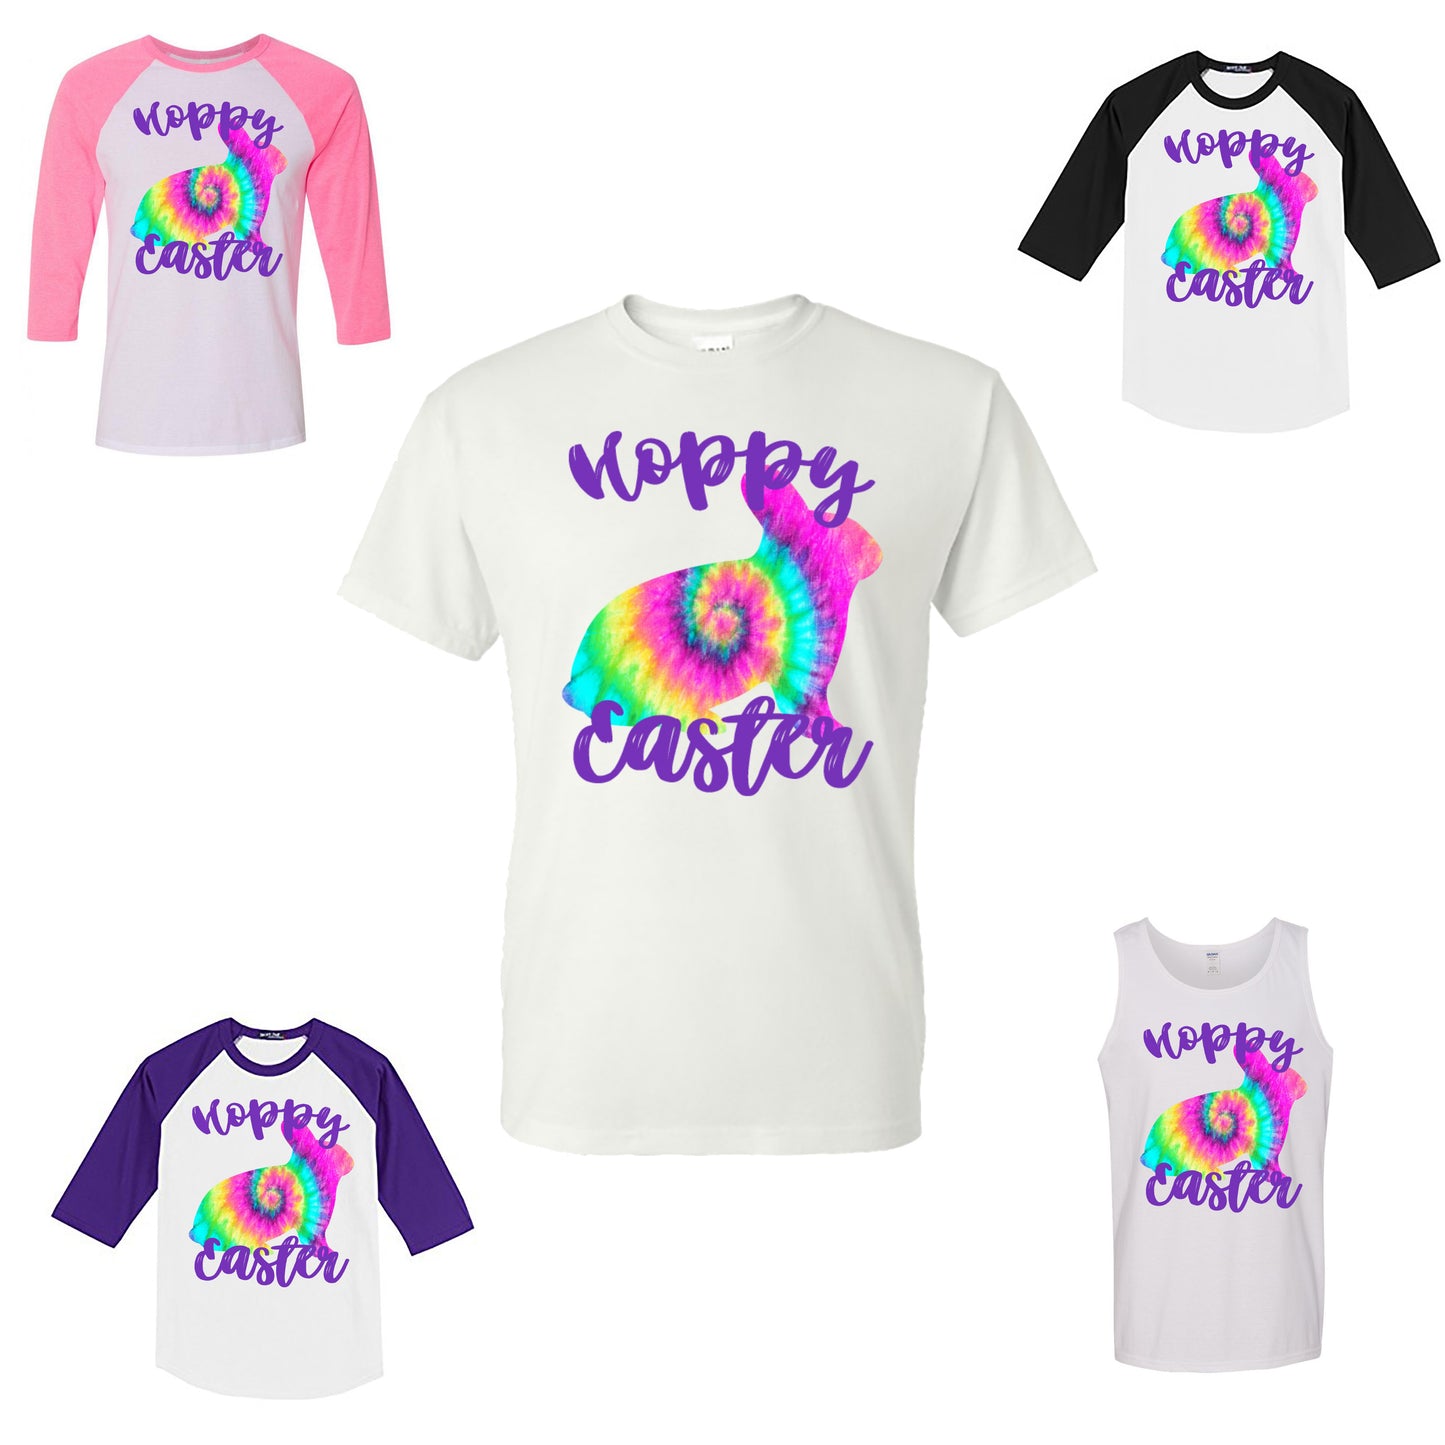 HOPPY EASTER WITH TIE DYE BUNNY SHIRT - Southern Grace Creations